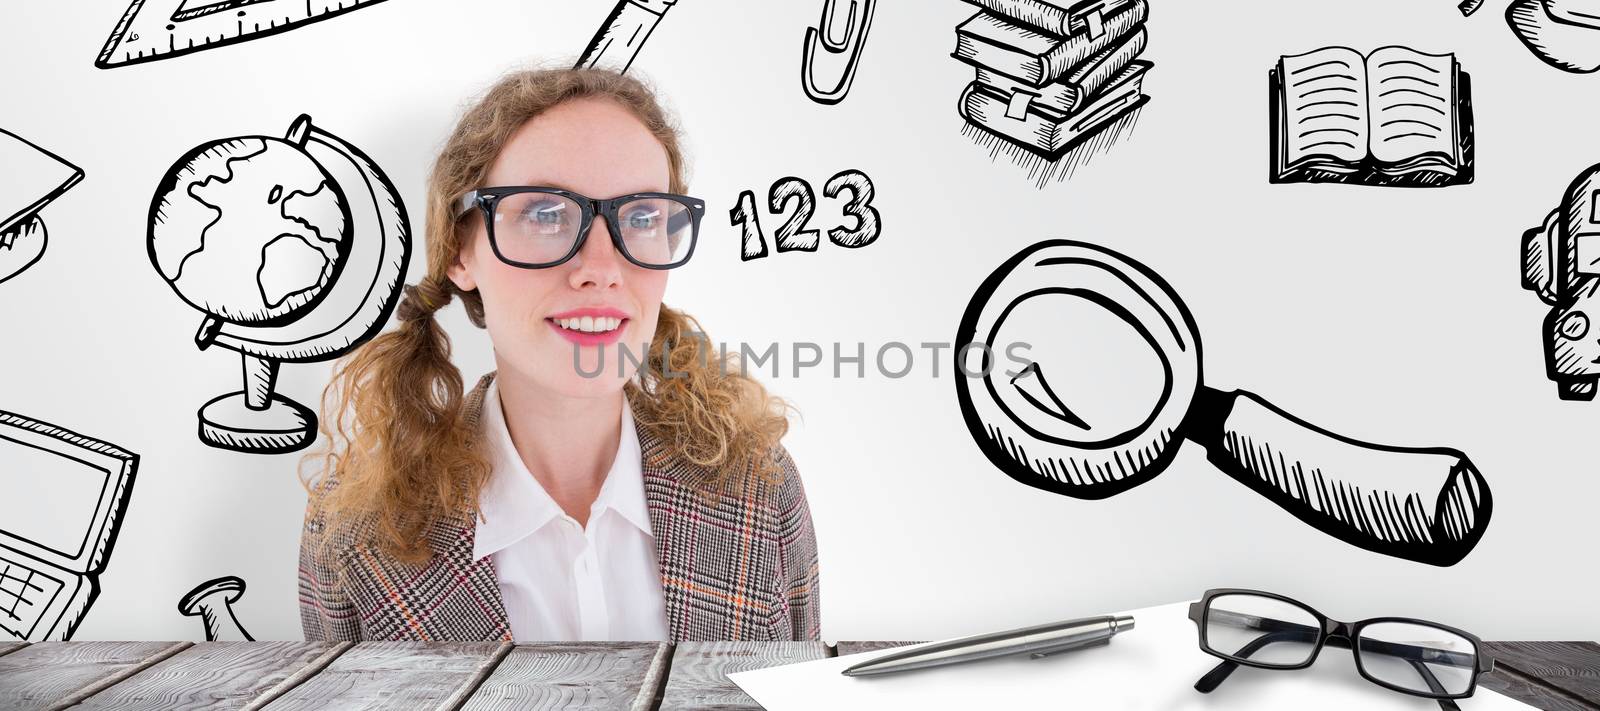 smiling  geeky hipster girl looking at something against desk